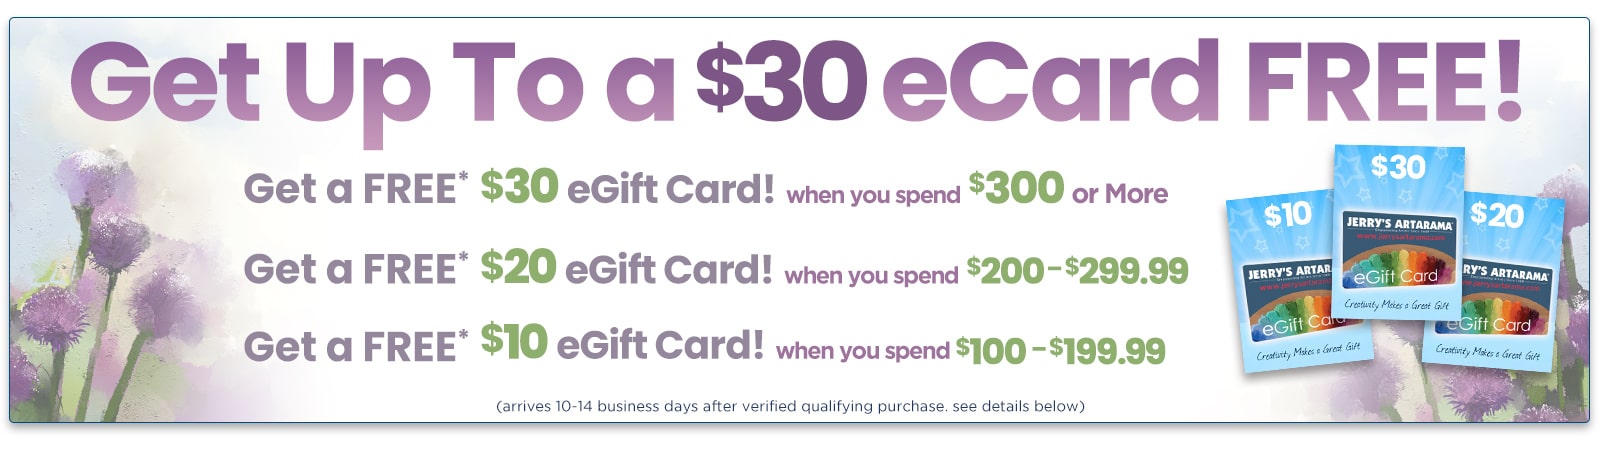 FREE eGift Card Offer with select purchase -Shop Now